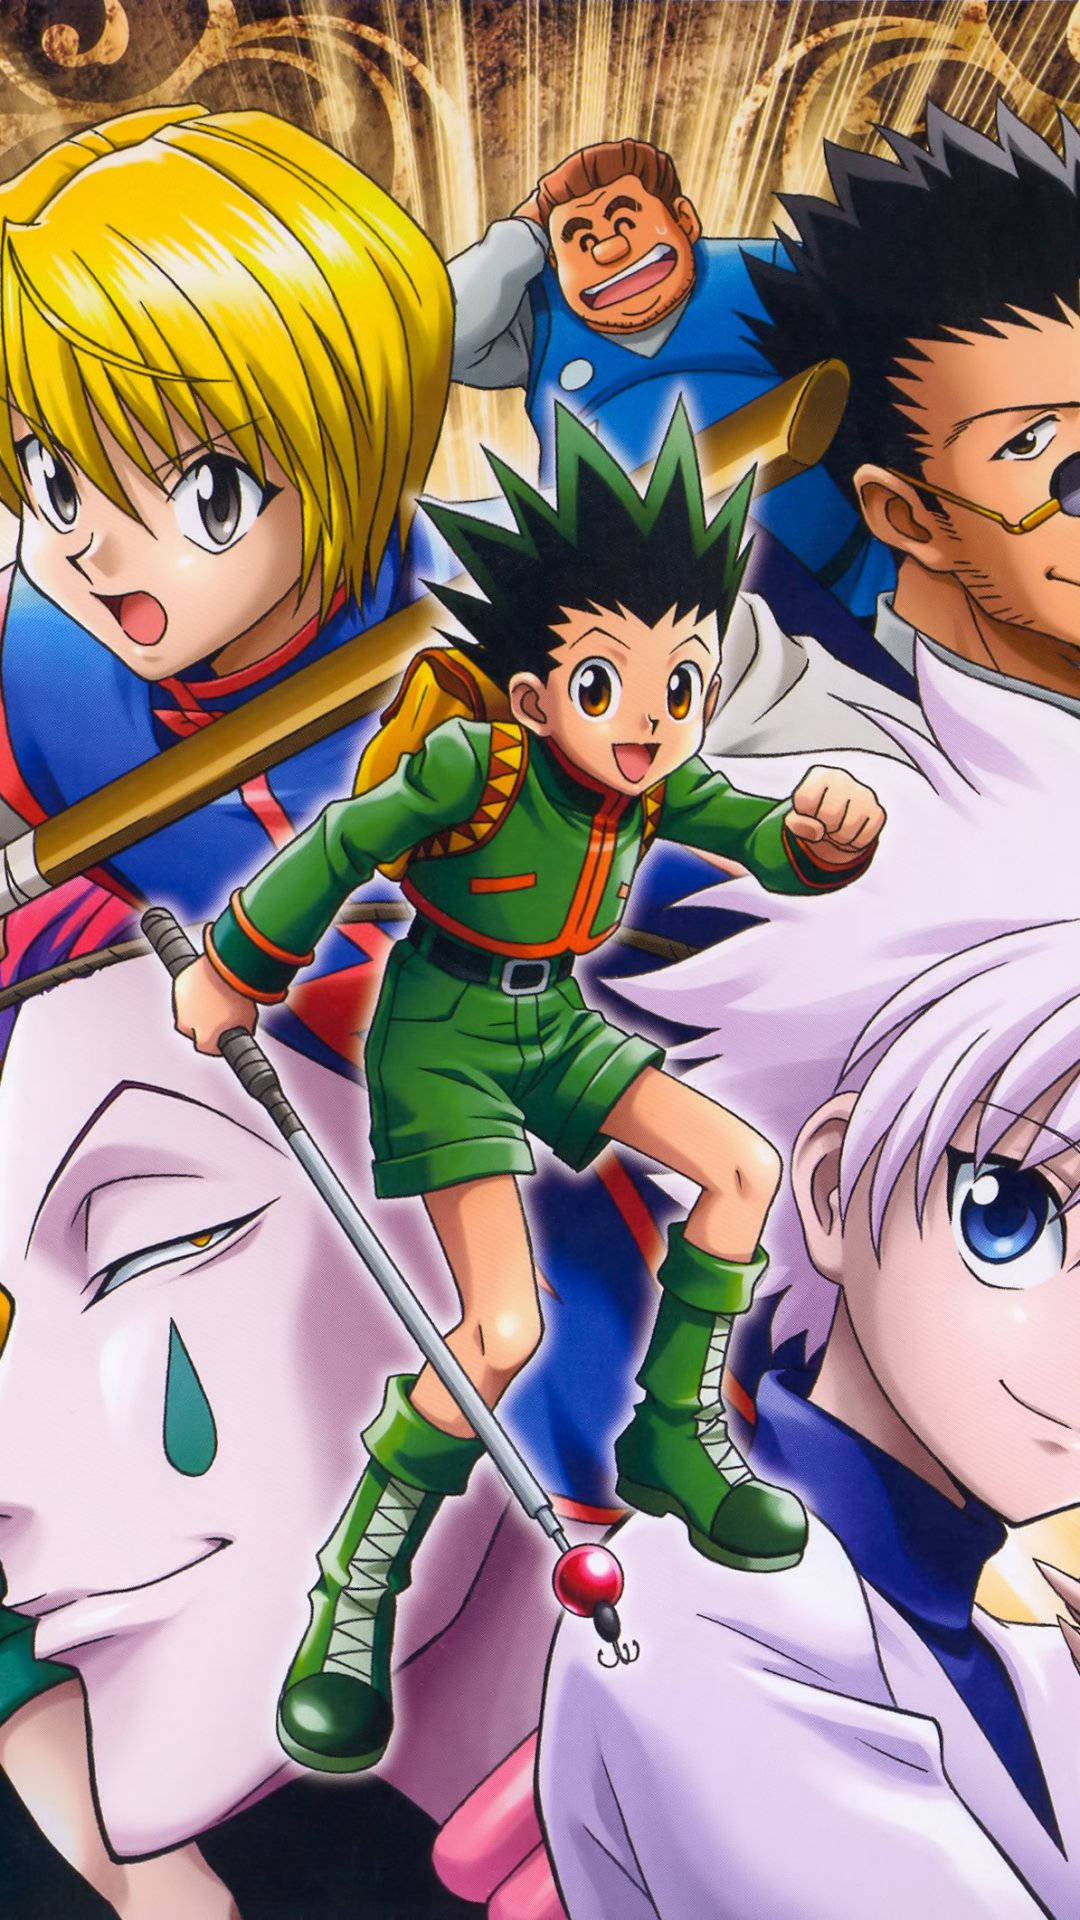 Check Out the Hunter X Hunter Iphone Wallpaper